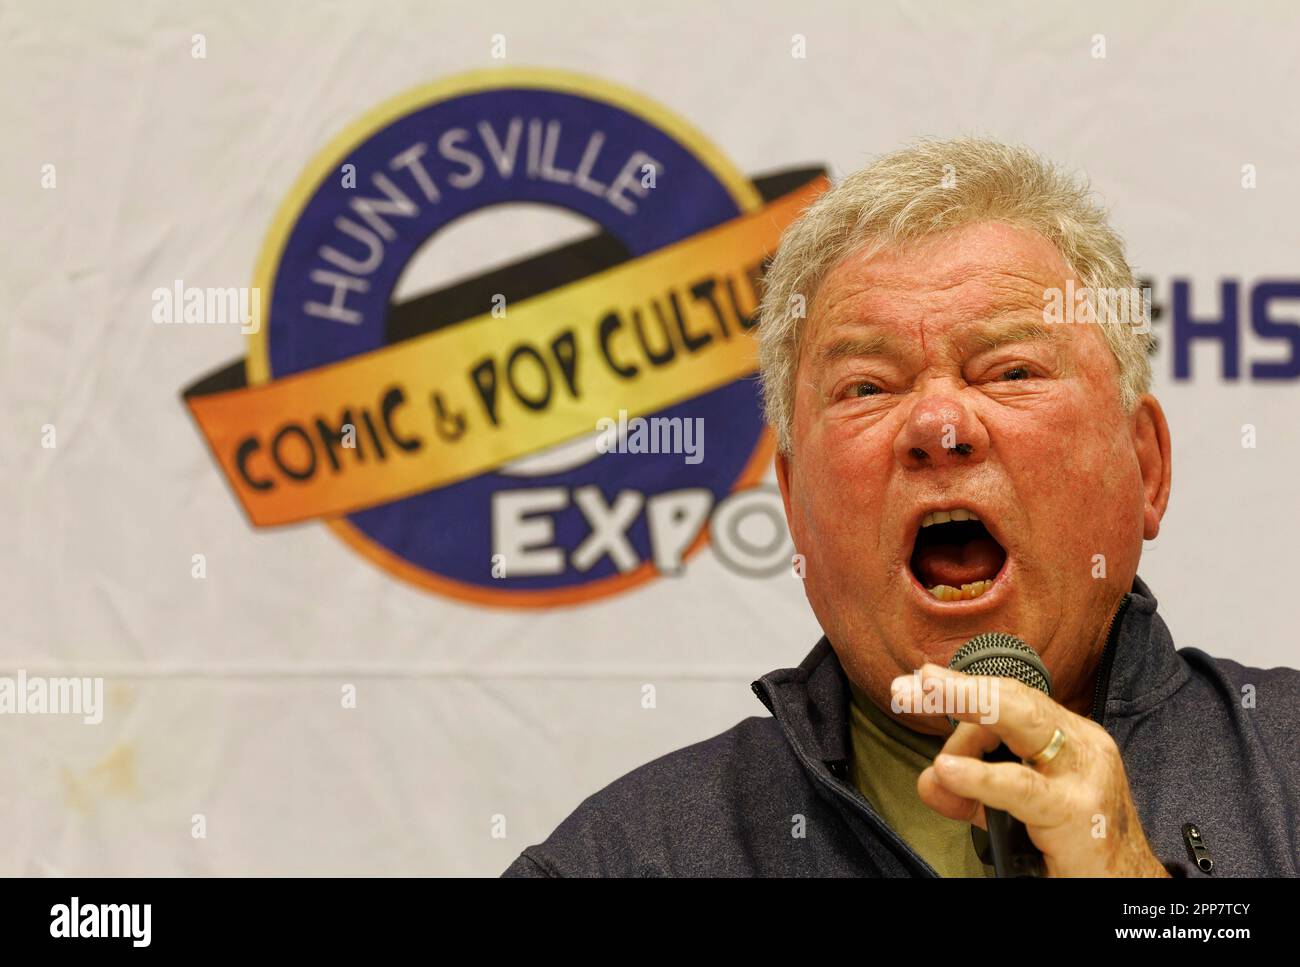 Huntsville, Alabama, USA. 22 Apr 2023. Star Trek actor William Shatner screams "Khaaan!" like he famously did in the 1982 film Star Trek II: The Wrath of Khan in response to an audience member's request on the second day of the 2023 Huntsville Comic & Pop Culture Expo on Saturday, April 22, 2023 at the Von Braun Center in Huntsville, Madison County, AL, USA. The Canadian actor and author, 92, is perhaps best known for his portrayal of Capt. James Tiberius Kirk in the original Star Trek television series and subsequent movies. (Credit: Billy Suratt/Apex MediaWire via Alamy Live News) Stock Photo